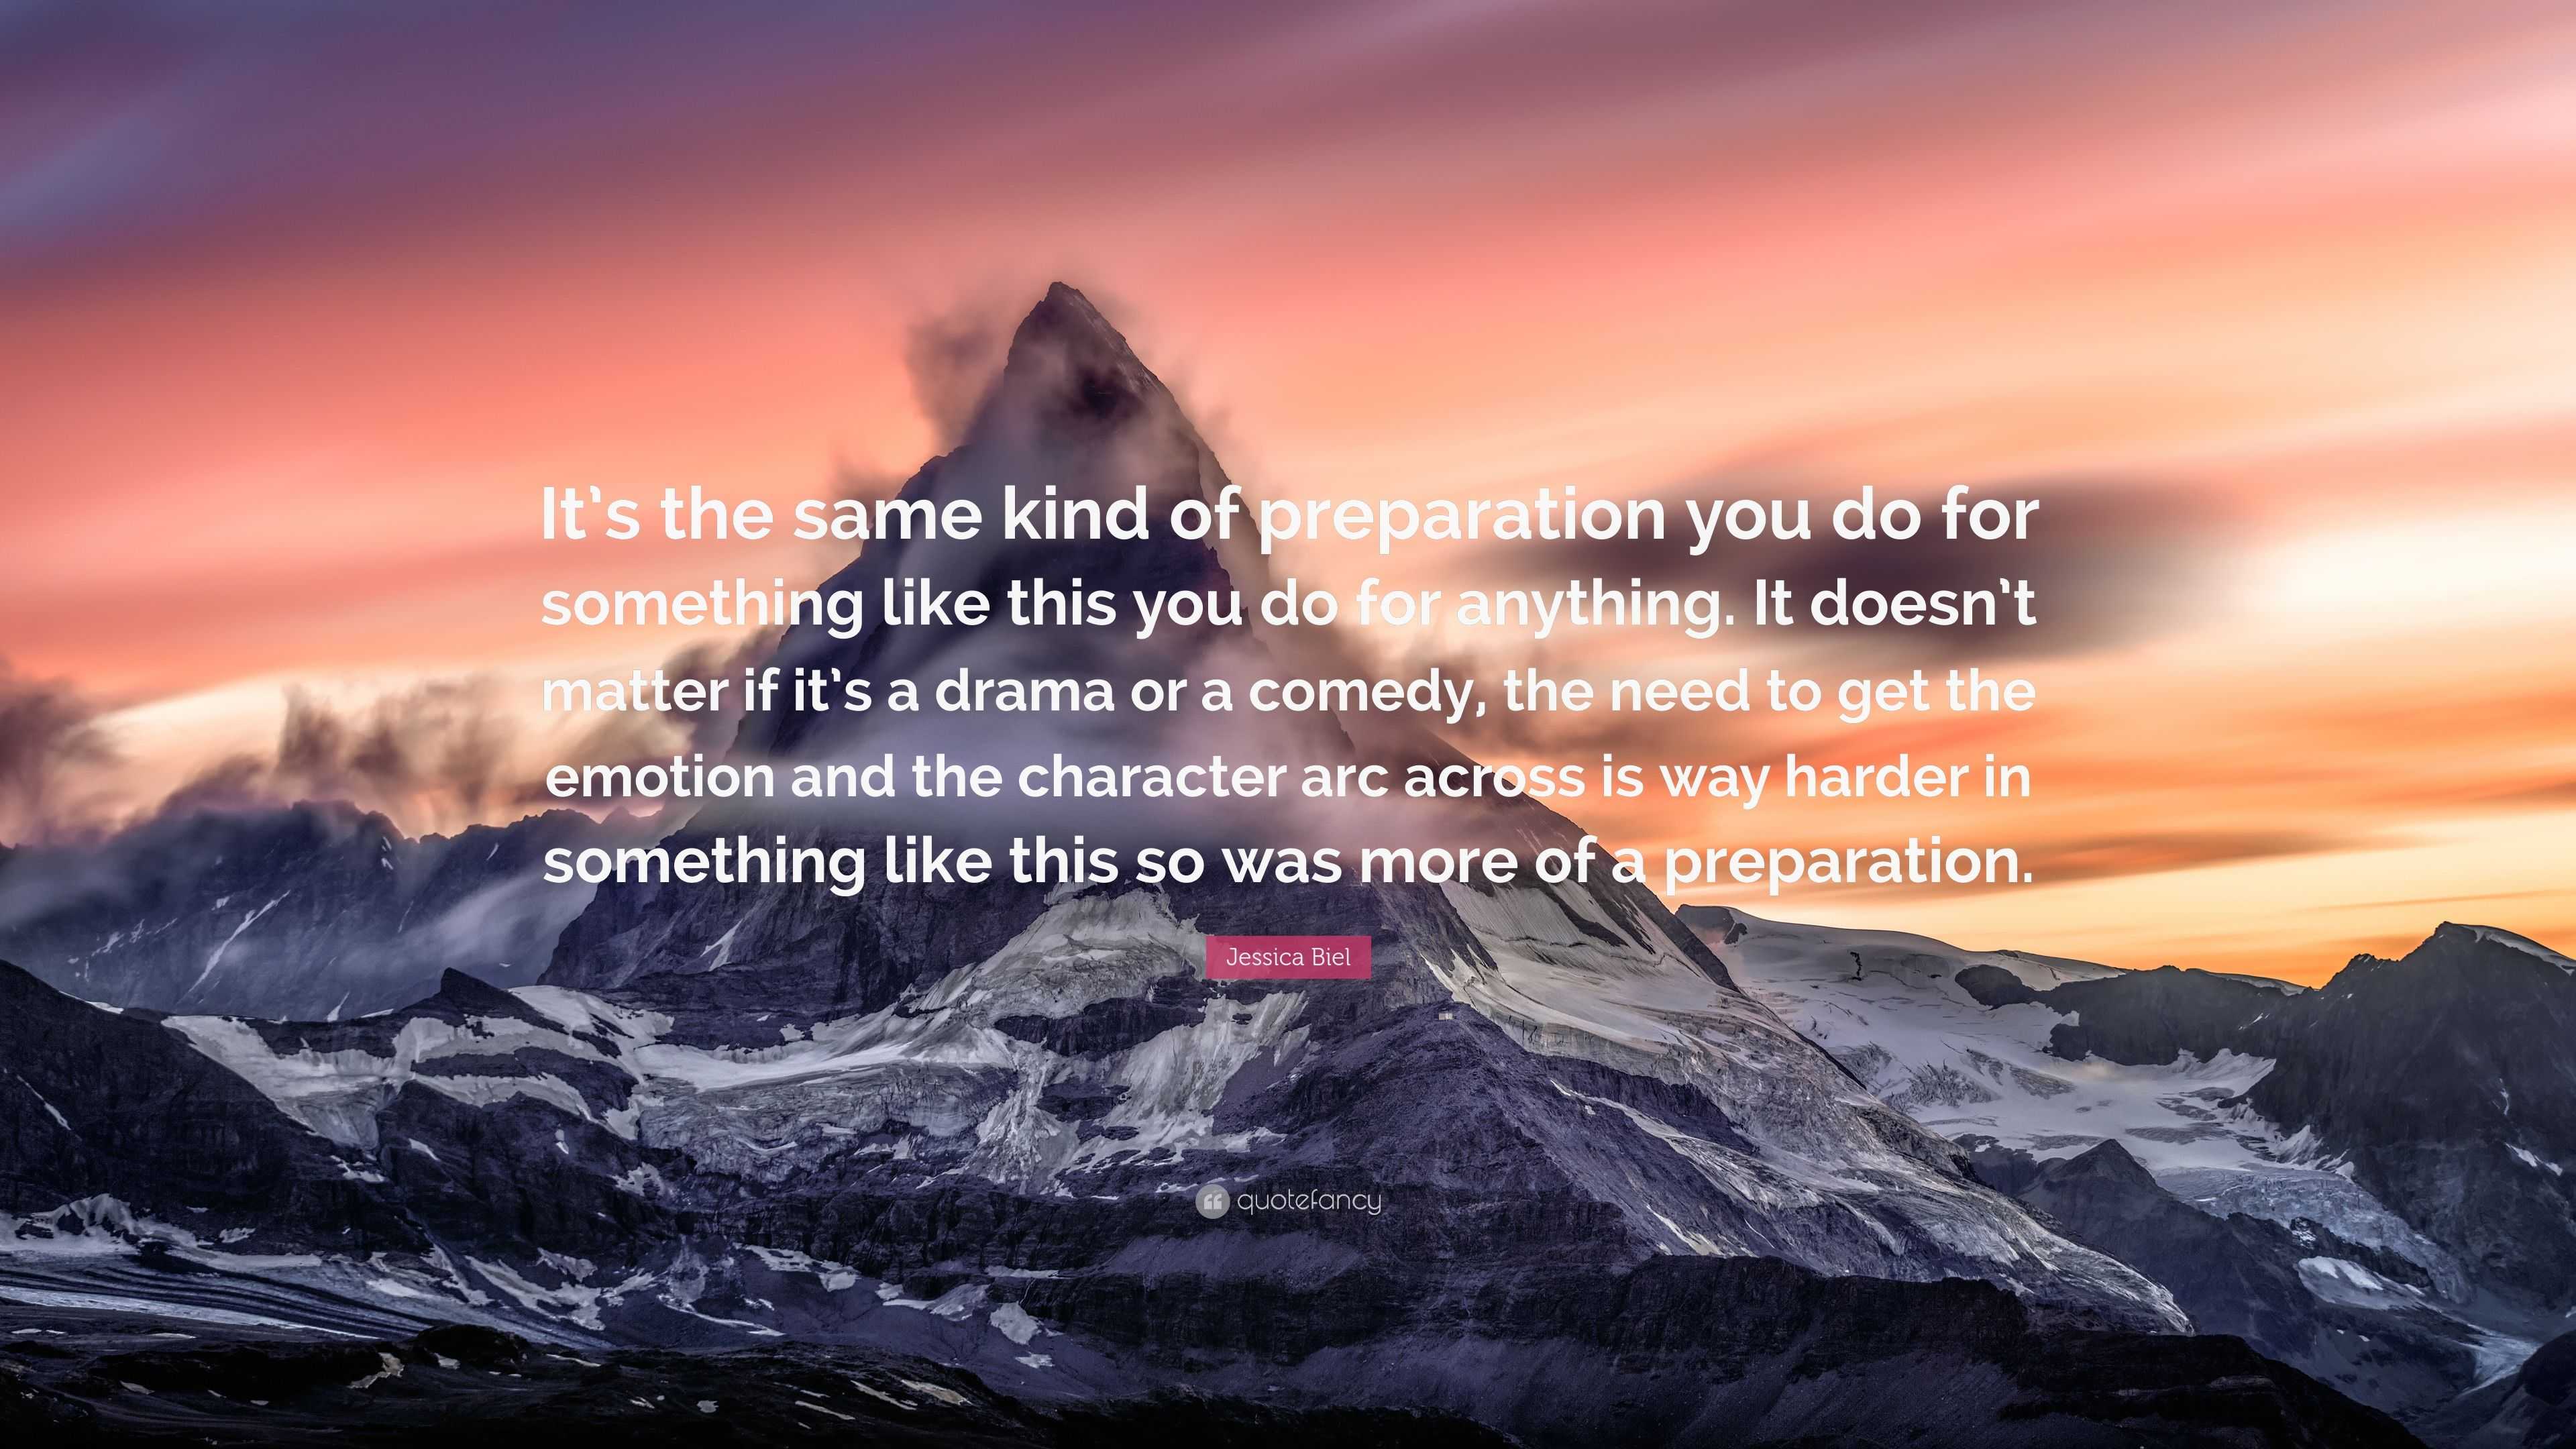 Jessica Biel Quote: “It’s the same kind of preparation you do for ...